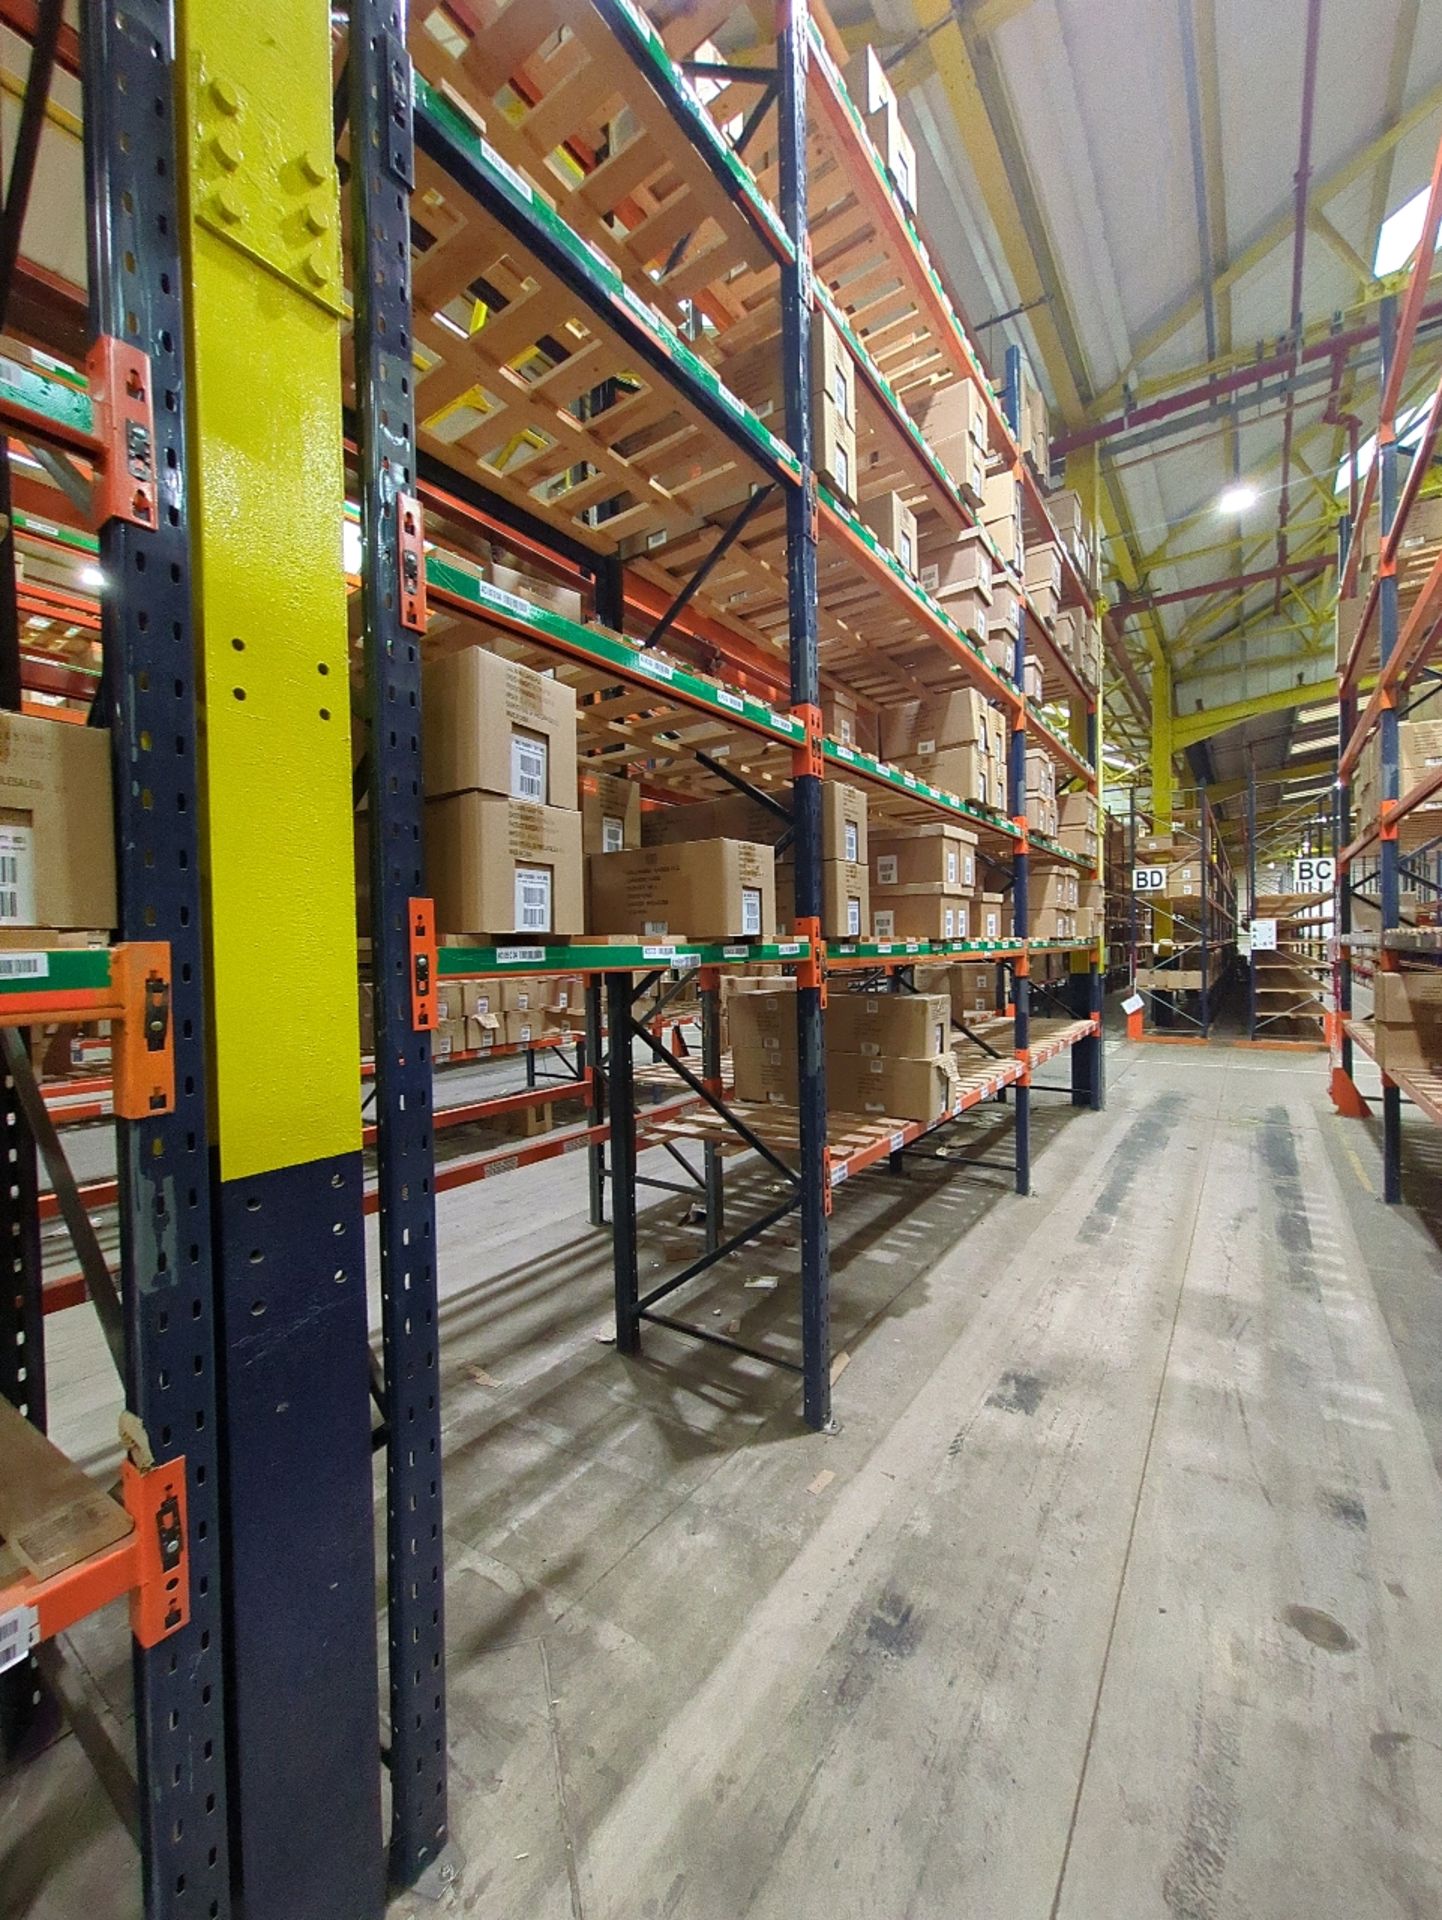 Run Of 43 Bays Of Boltless Industrial Pallet Racking - Image 7 of 21